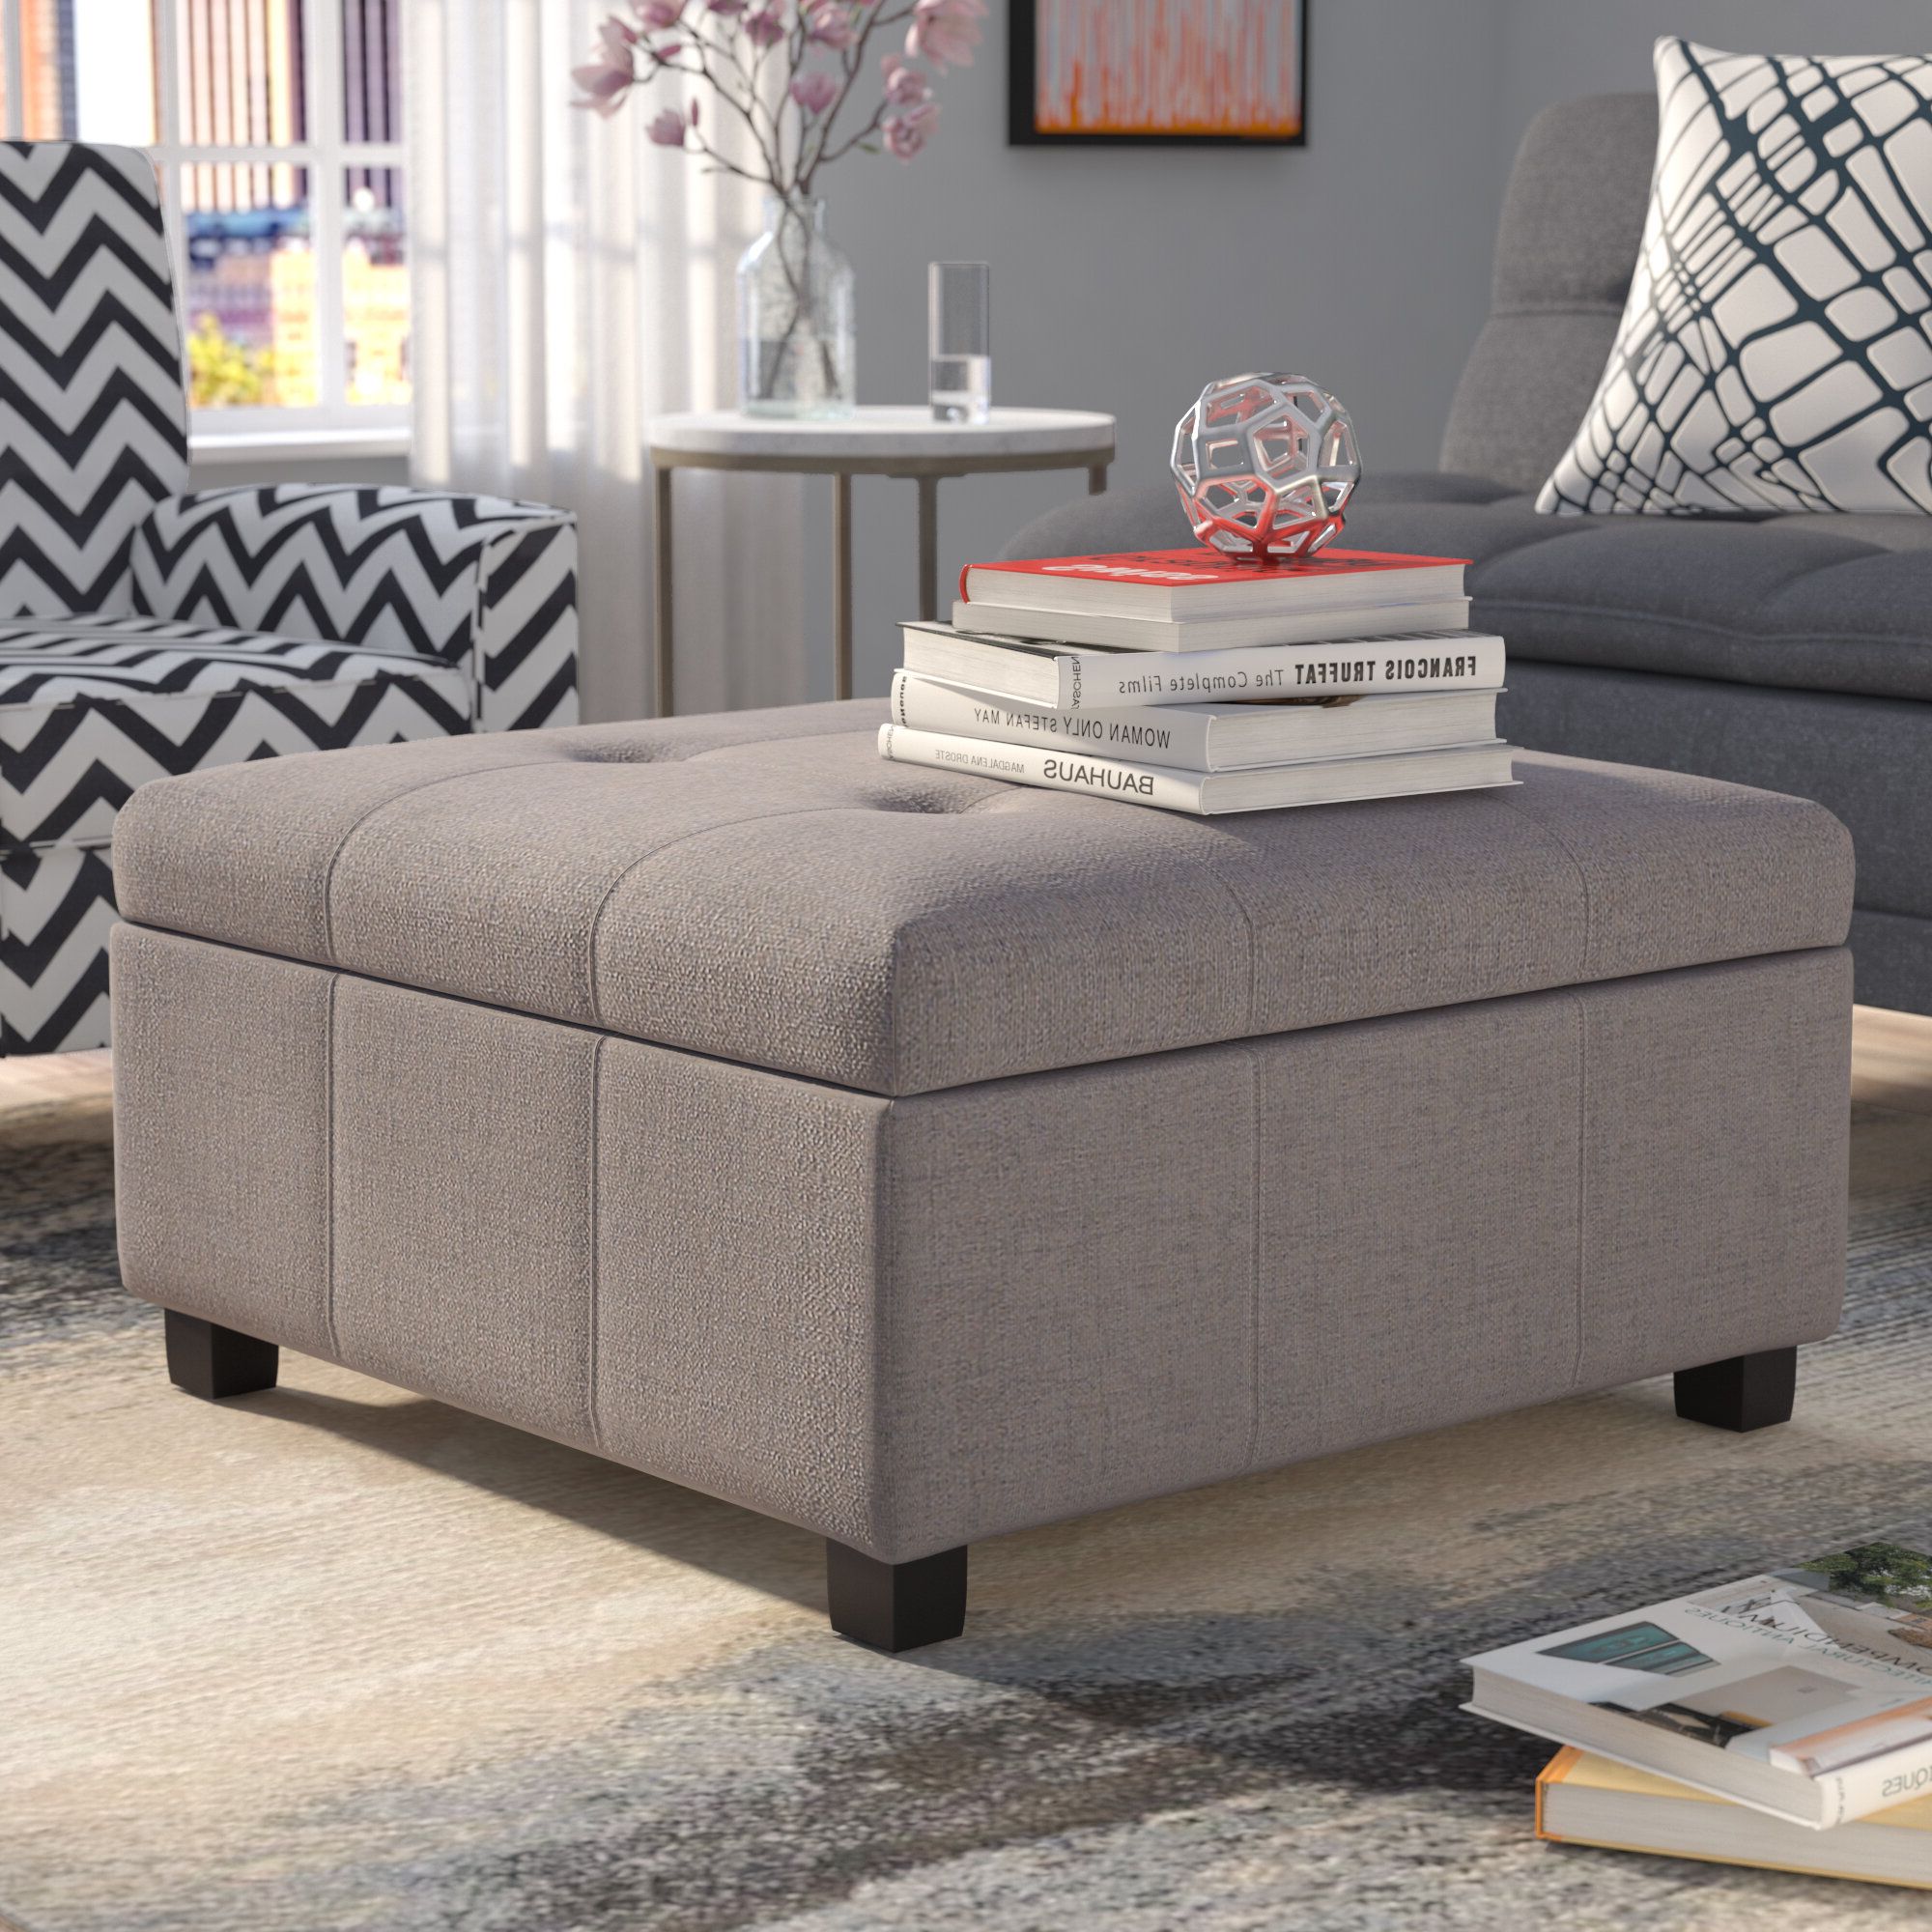 Gray Ottomans Intended For 2020 Wade Logan® Jamil Upholstered Storage Ottoman & Reviews (View 12 of 15)